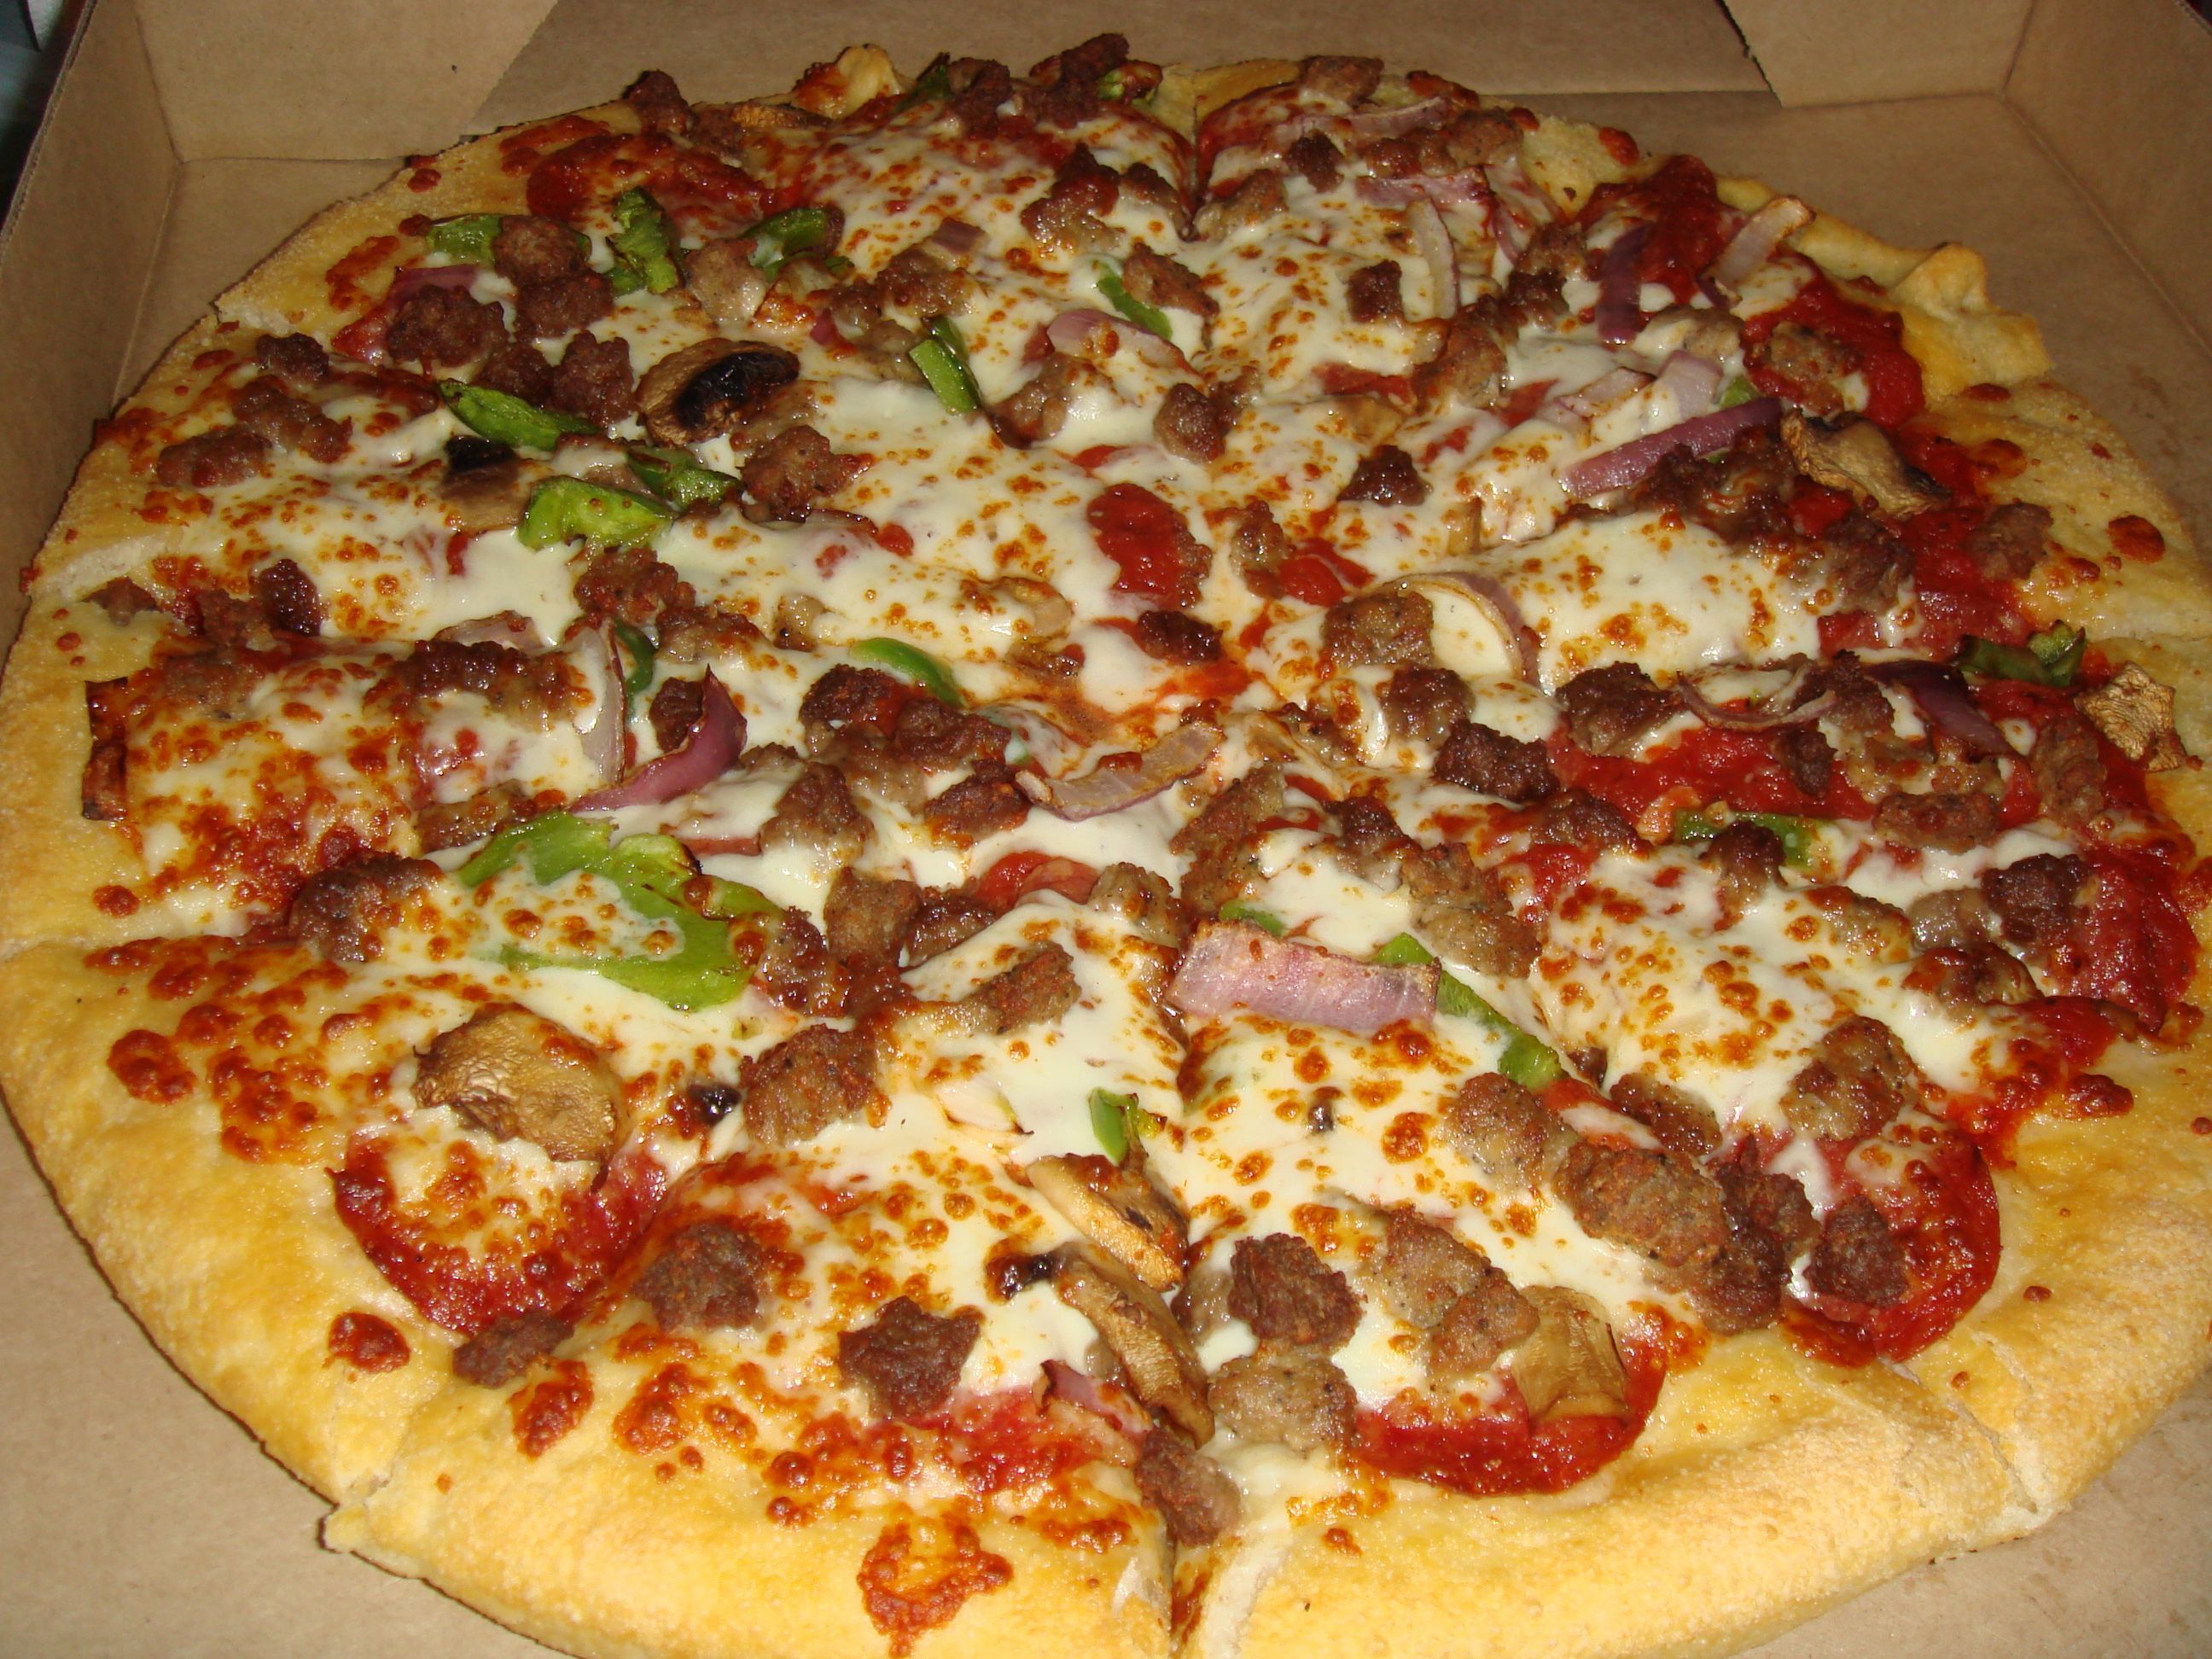 Avail special How To Compare the Prices of Pizza at Domino's